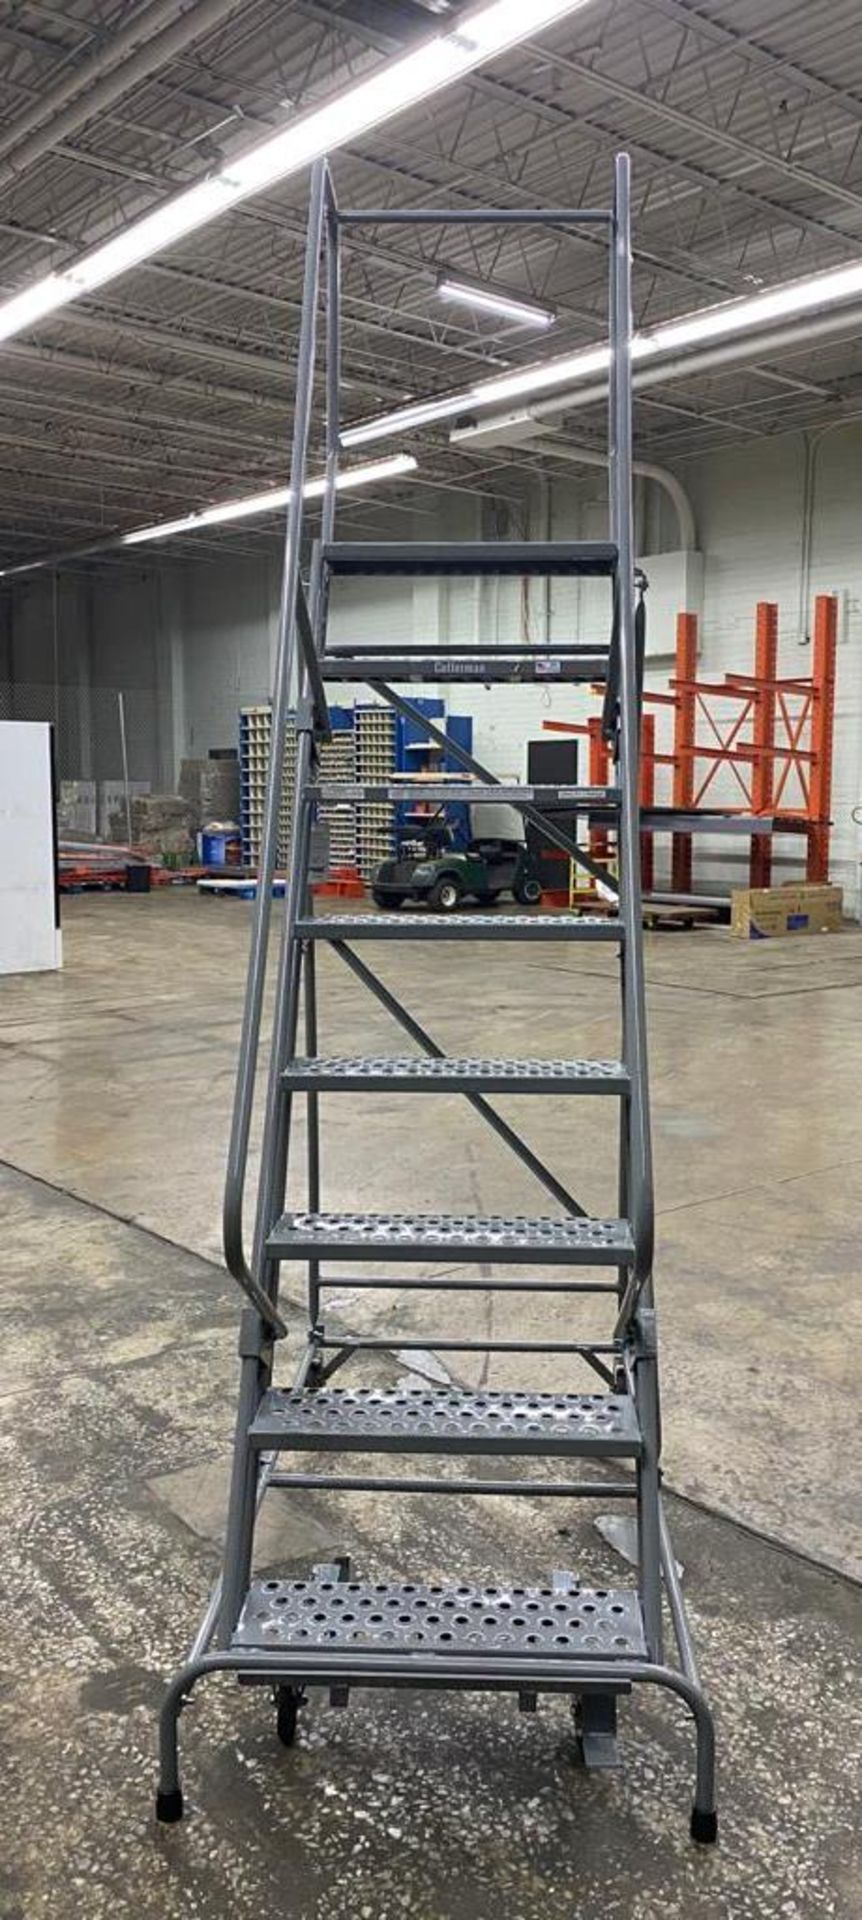 NEW 8 STEP ROLLING LADDER